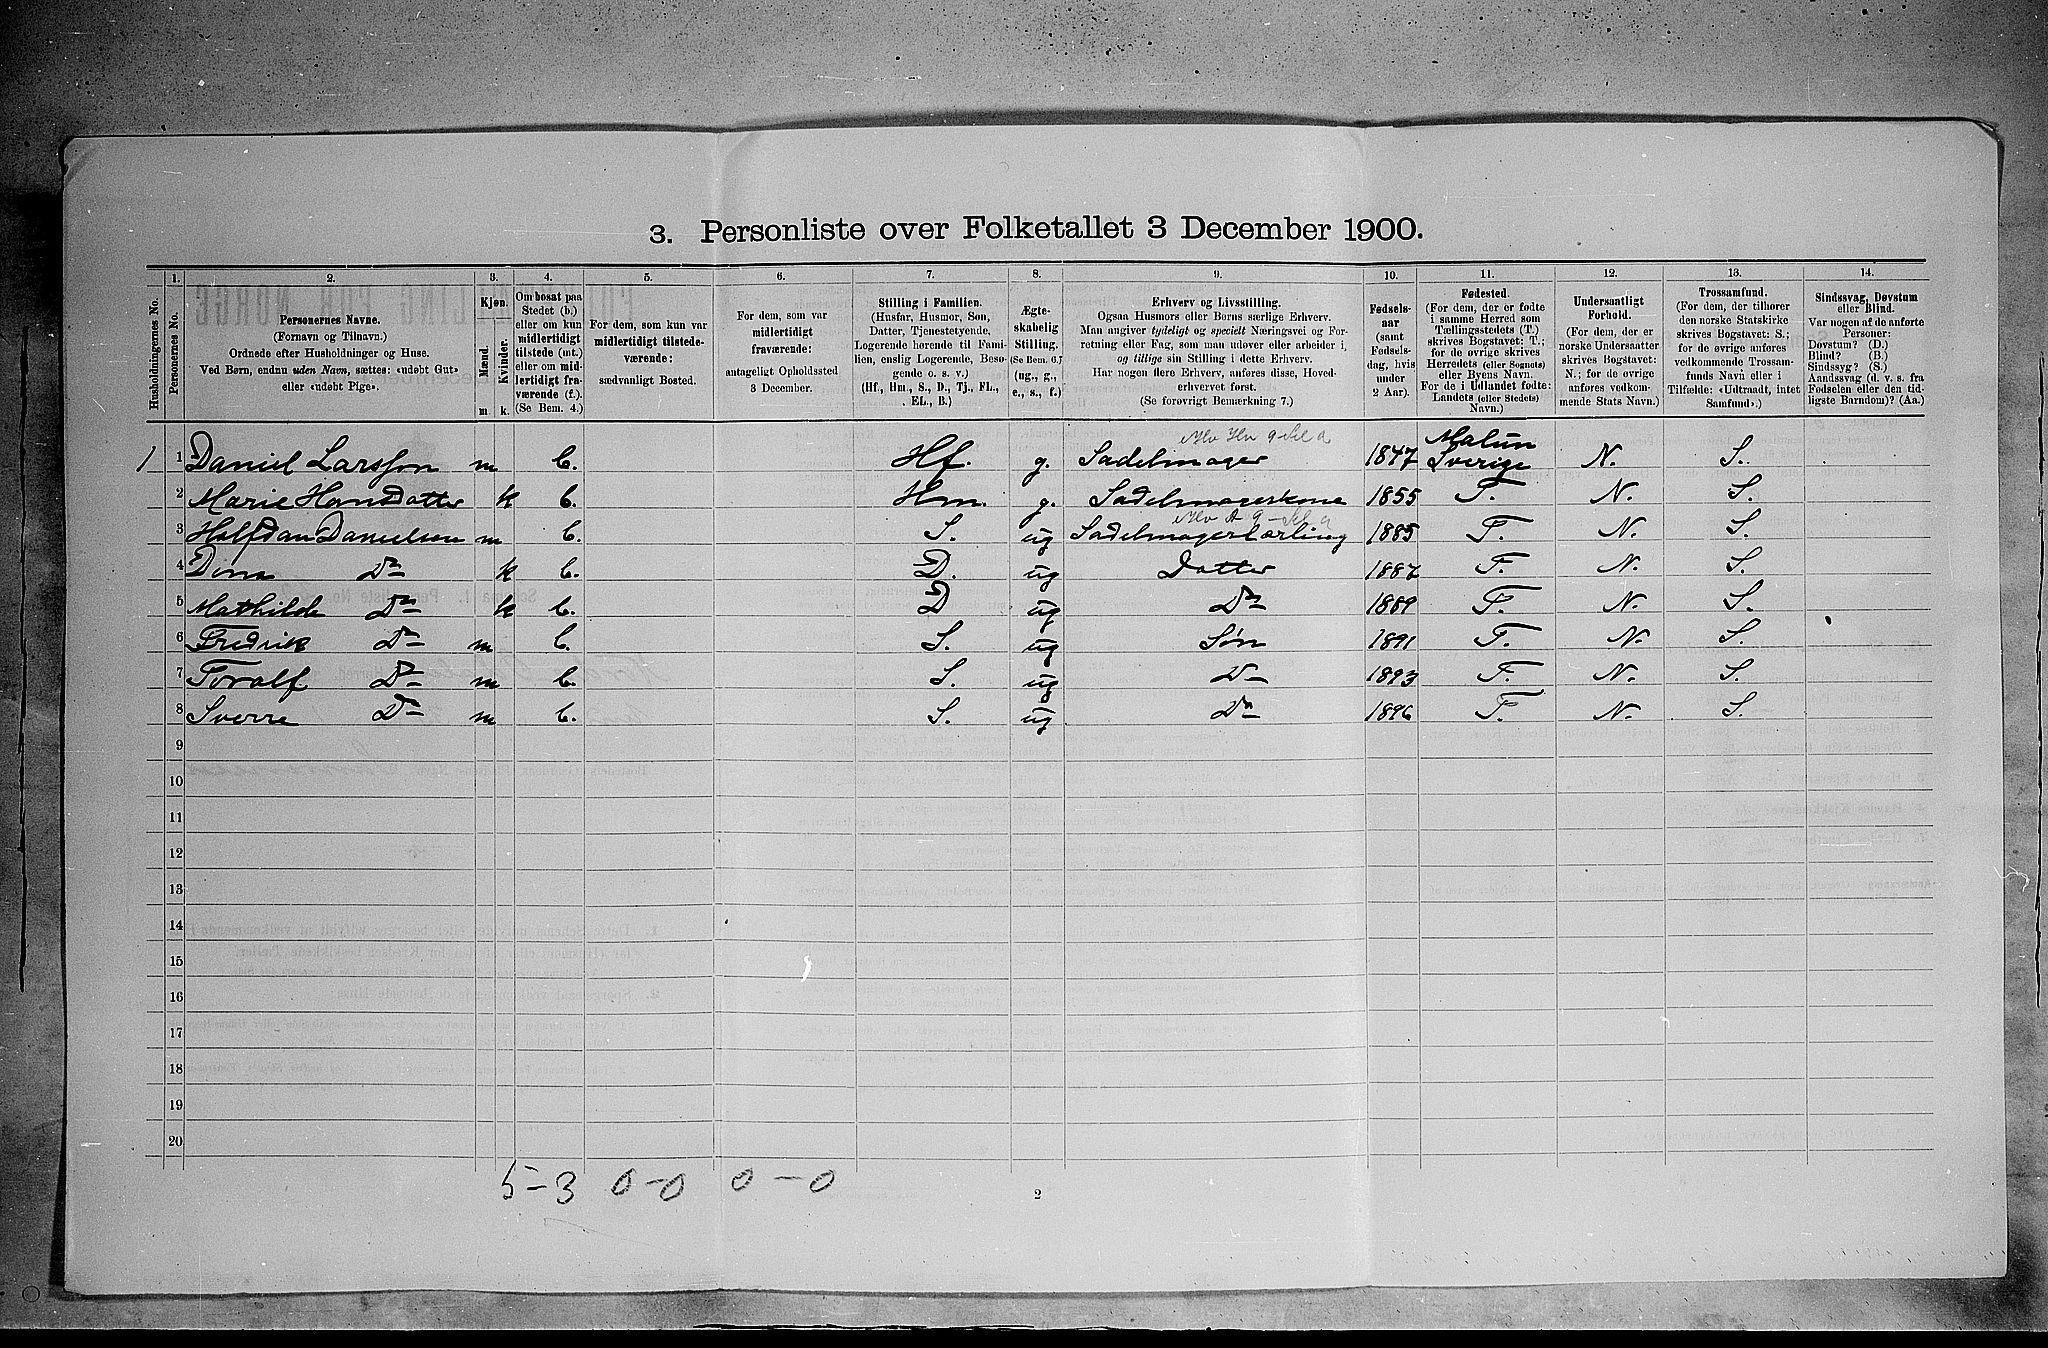 SAH, 1900 census for Nord-Odal, 1900, p. 704